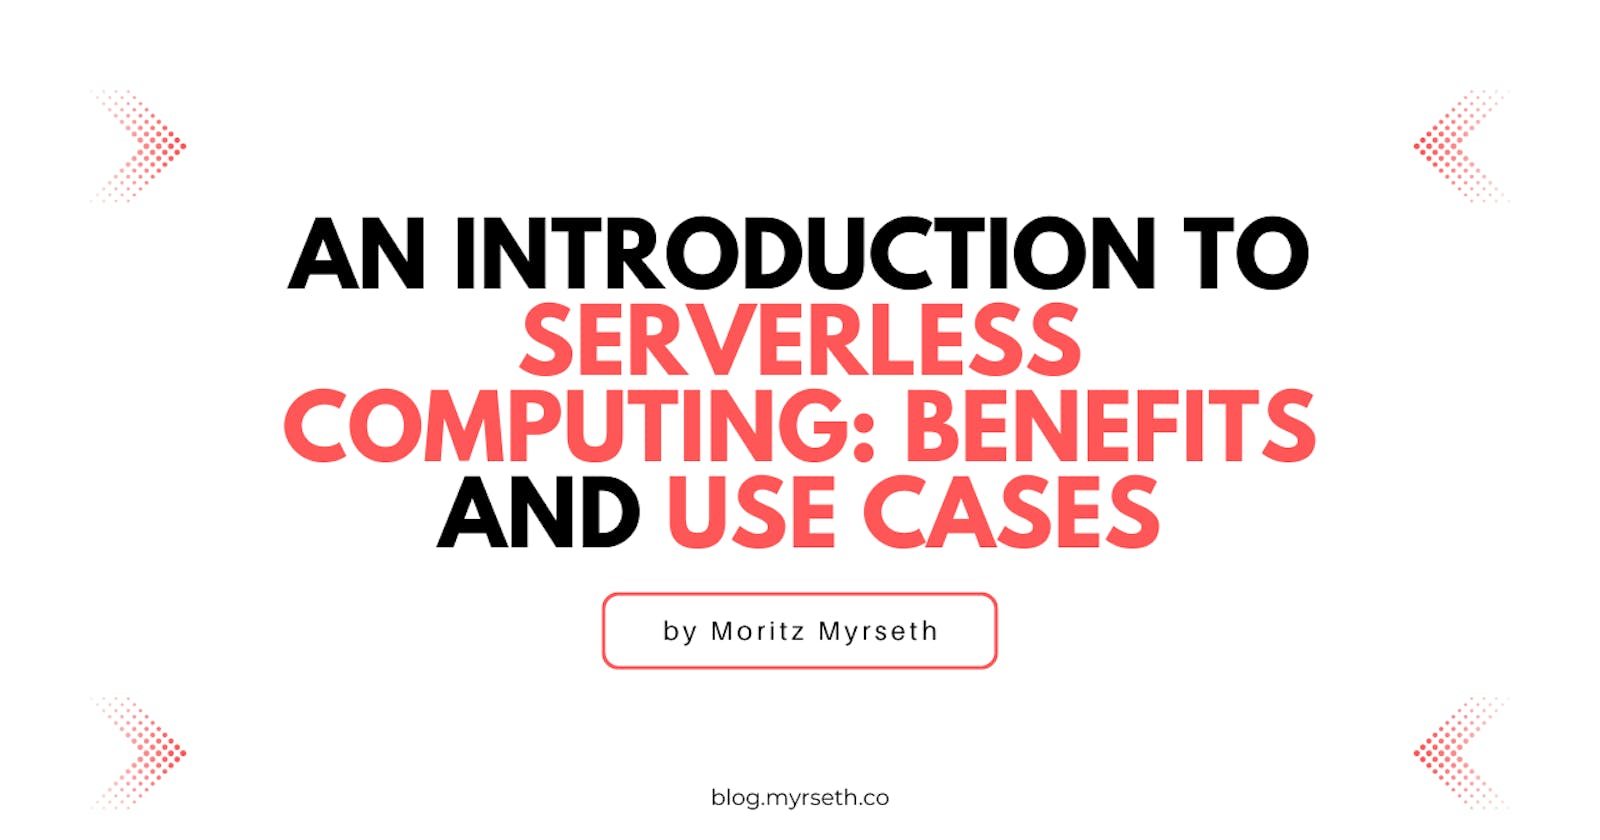 An Introduction to Serverless Computing: Benefits and Use Cases